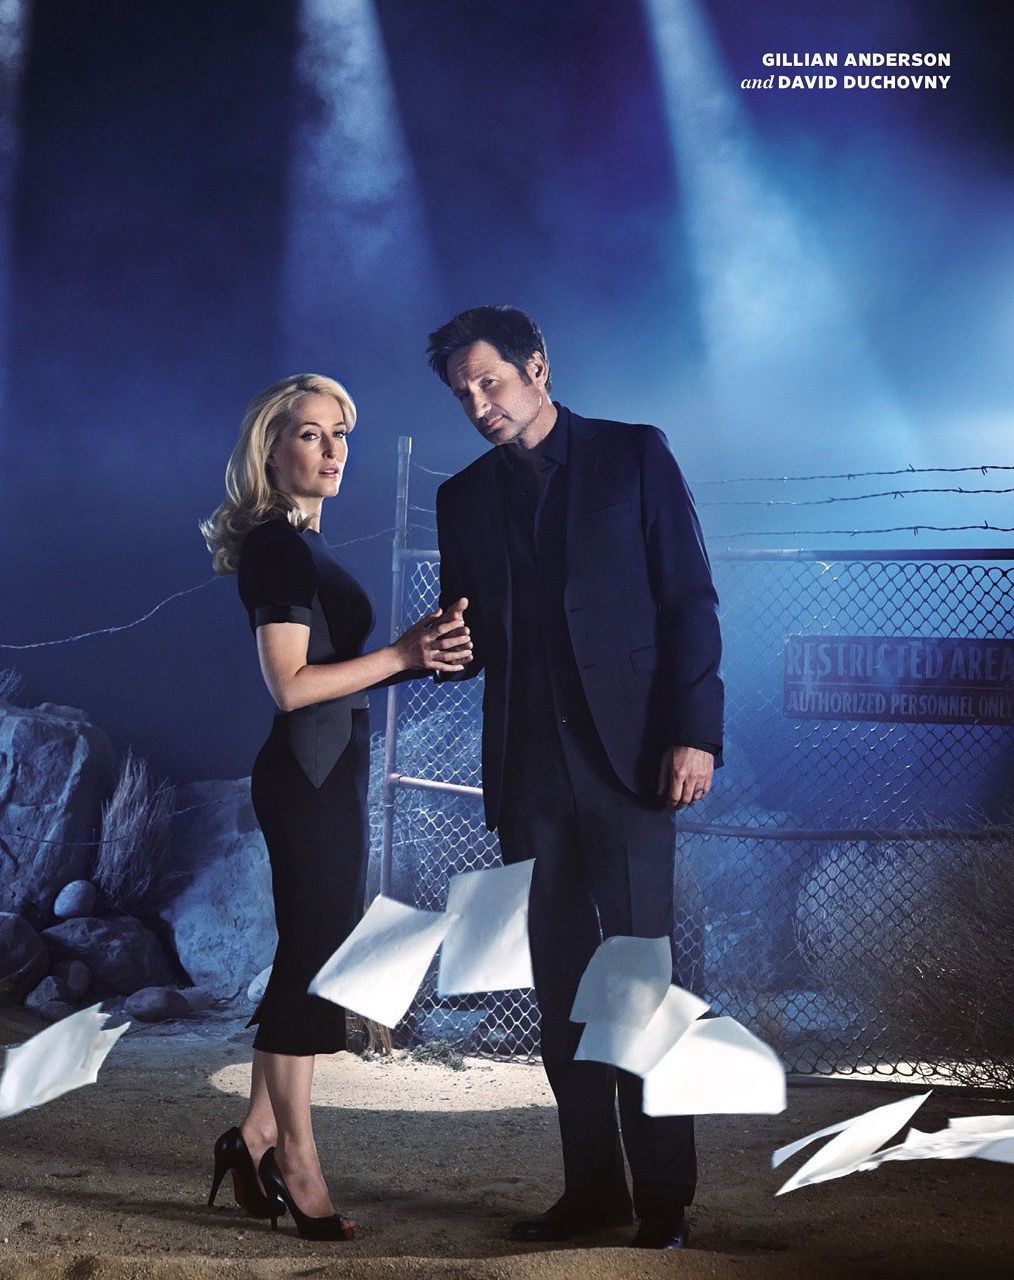 check-out-mulder-scully-in-new-photos-from-the-x-files-2016-miniseries-x-files-476091.jpg